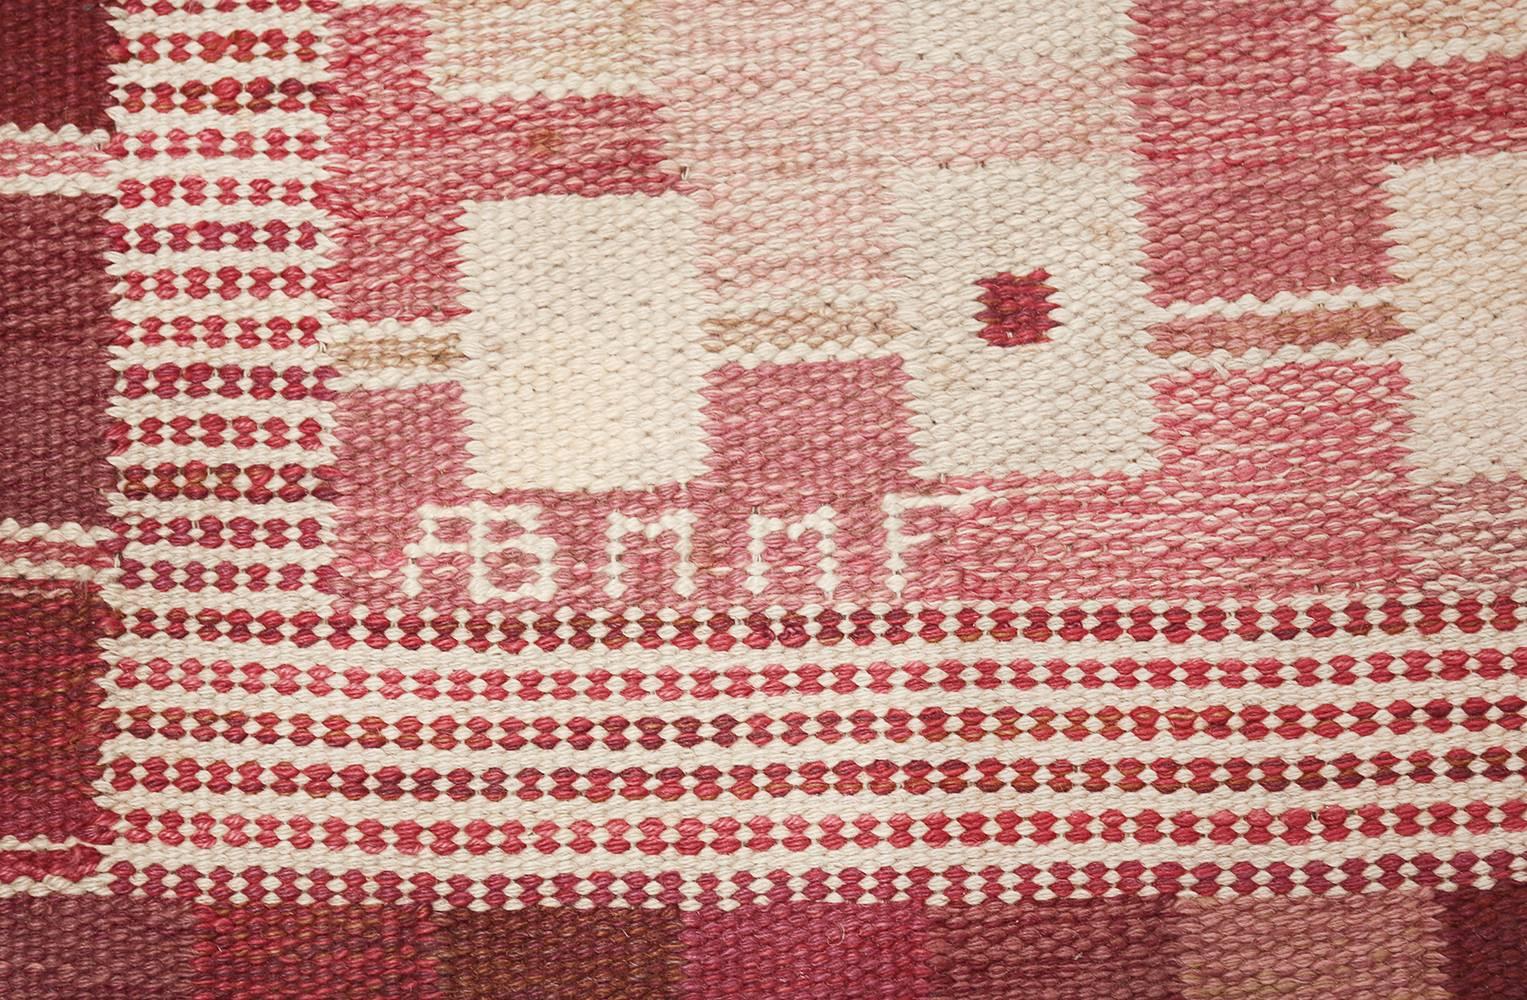 Beautiful Vintage Scandinavian Marta Maas Rug by Marianne Richter Country of Origin / Rug Type: Scandinavia Rug, Circa Date: Mid 20th Century.Size: 5 ft 10 in x 8 ft (1.78 m x 2.44 m)

This beautiful vintage mid century Marta Maas rug is a unique